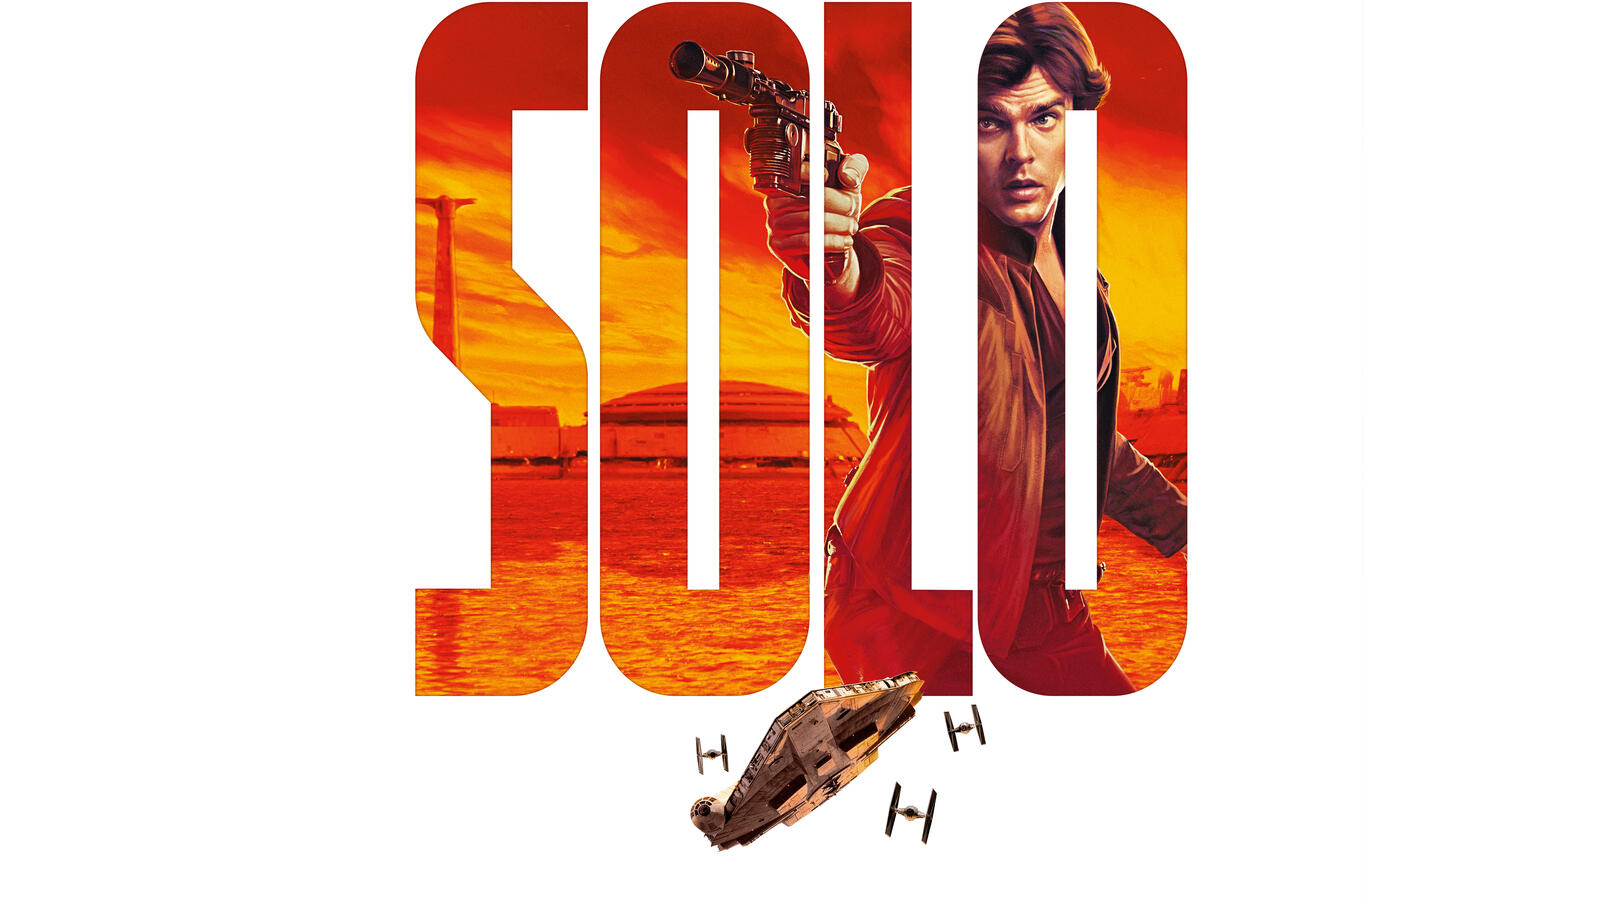 Wallpapers Solo A Star Wars Story poster movies on the desktop